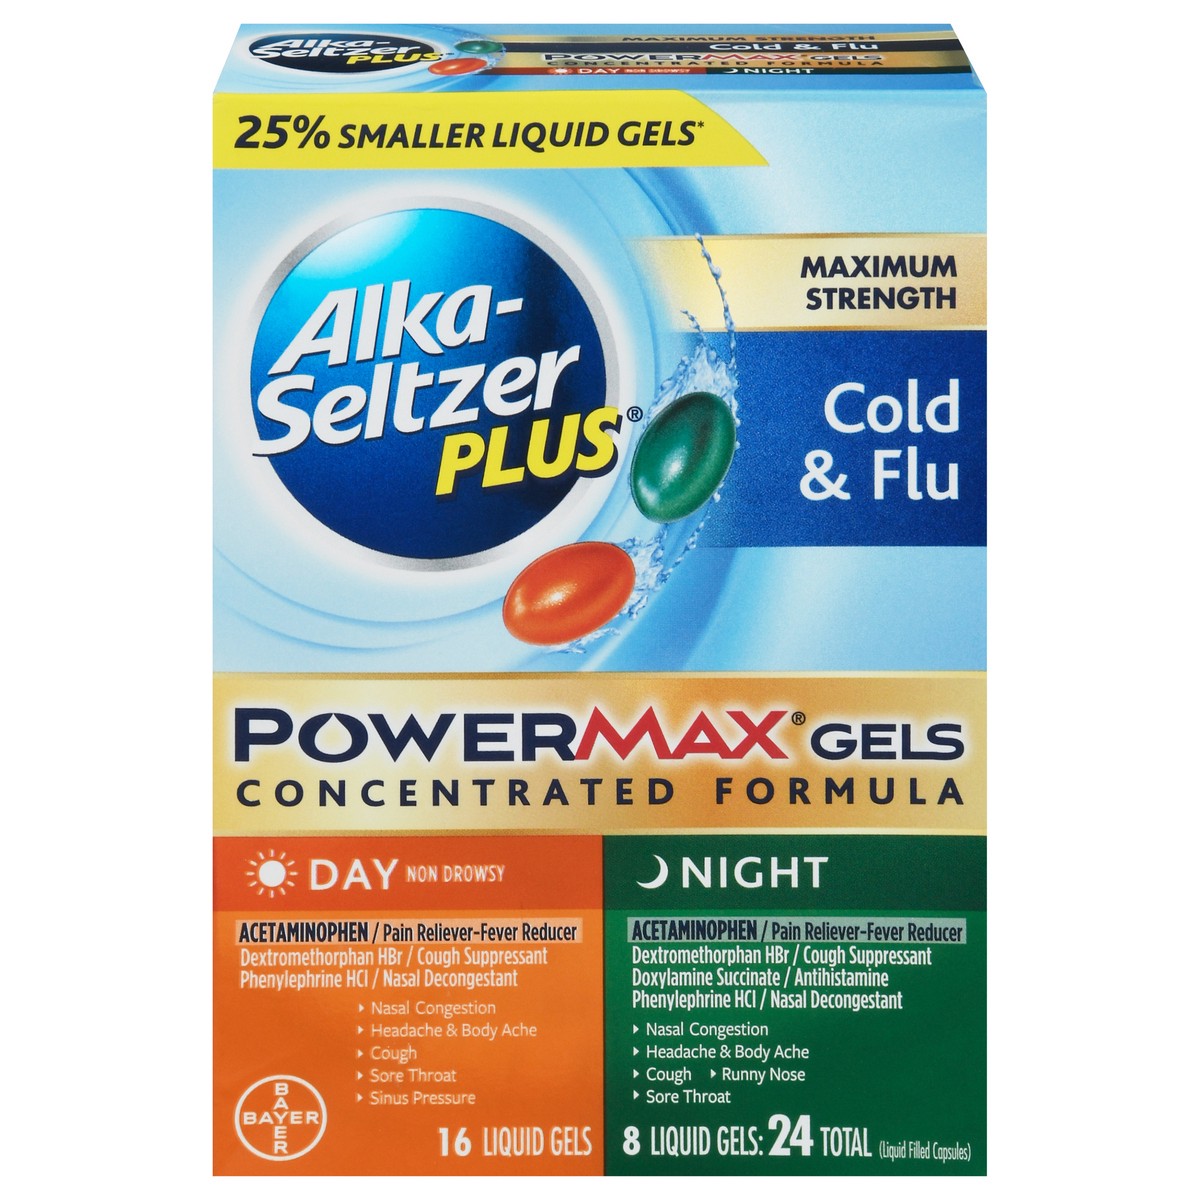 slide 1 of 9, Alka-Seltzer Plus Day & Night Non-Drowsy Cold & Flu Powermax Liquid Gels Concentrated Formula, 24 ct